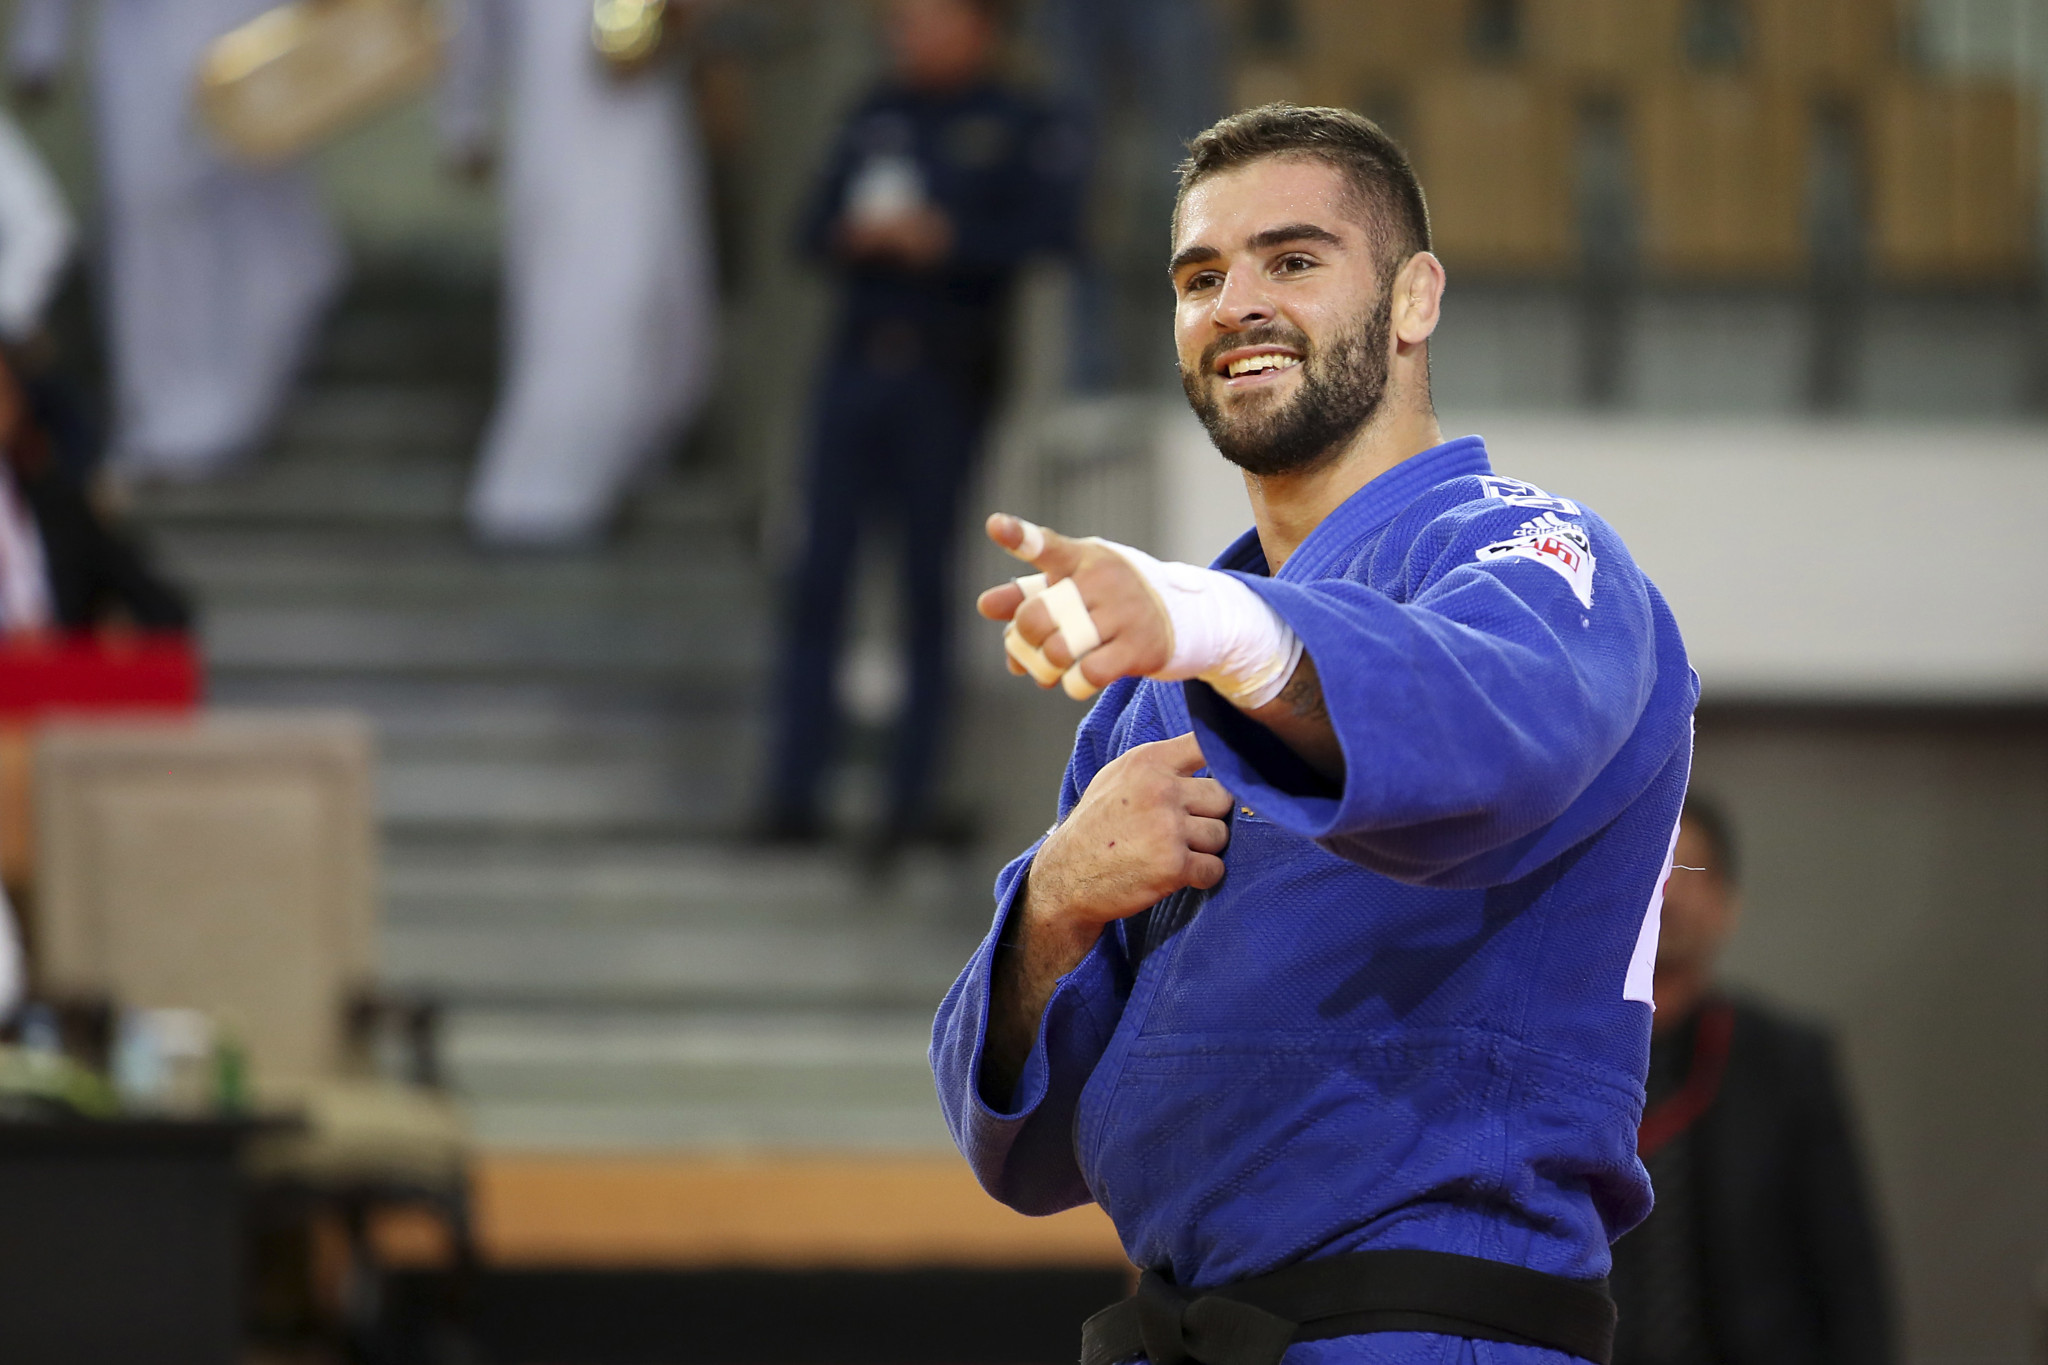 The 2020 Best European Male Judoka award went to Israel's Peter Paltchik, who was European champion in that year ©Getty Images